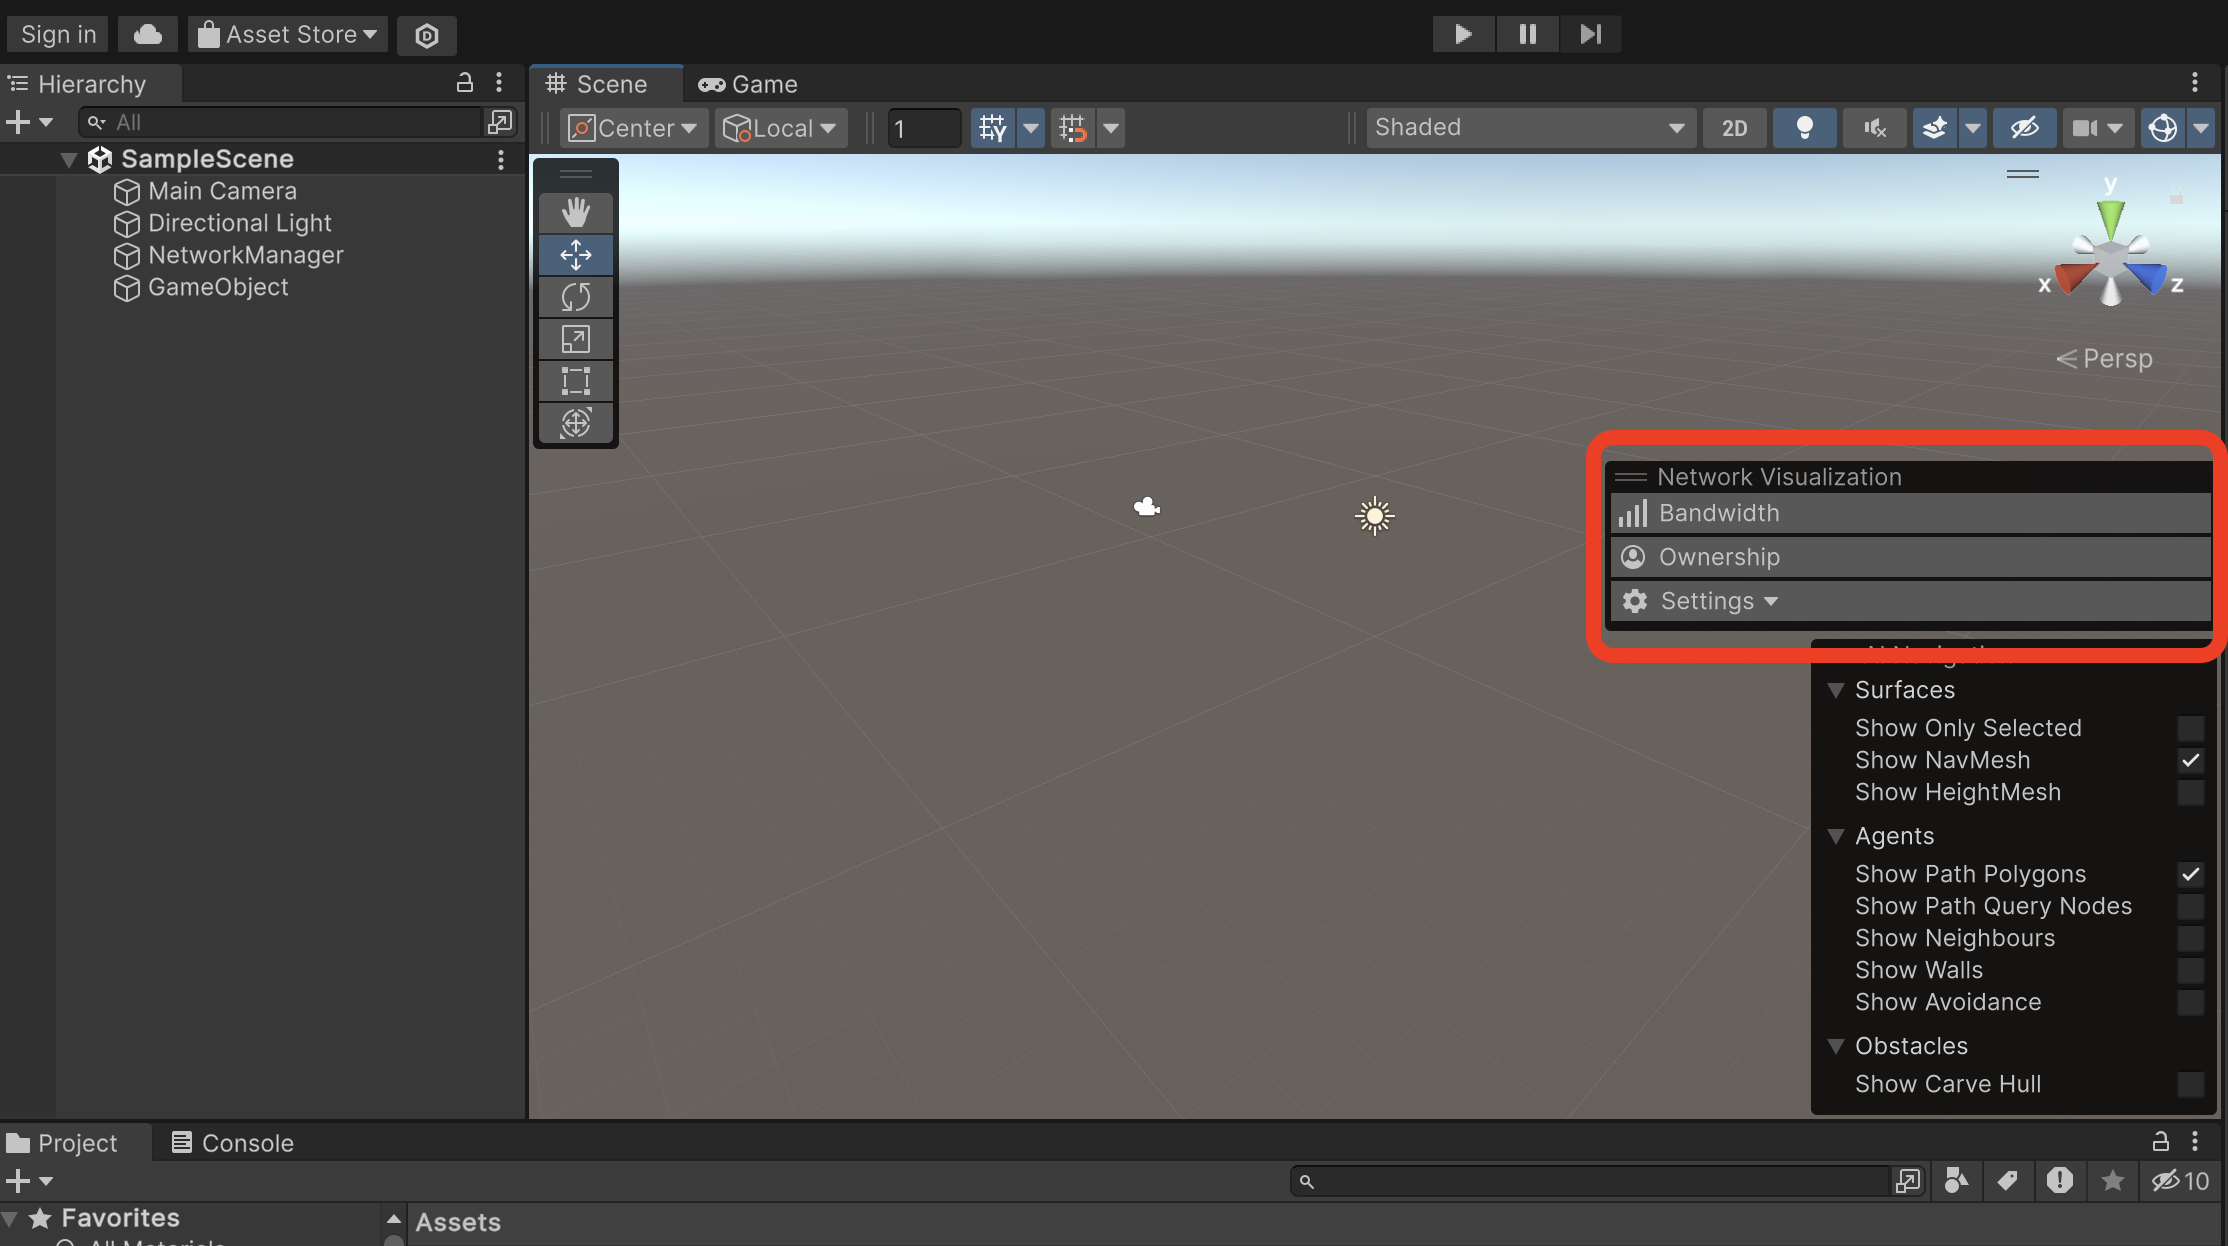 Screenshot of the Network Scene Visualization toolbar in the scene view of the Unity Editor